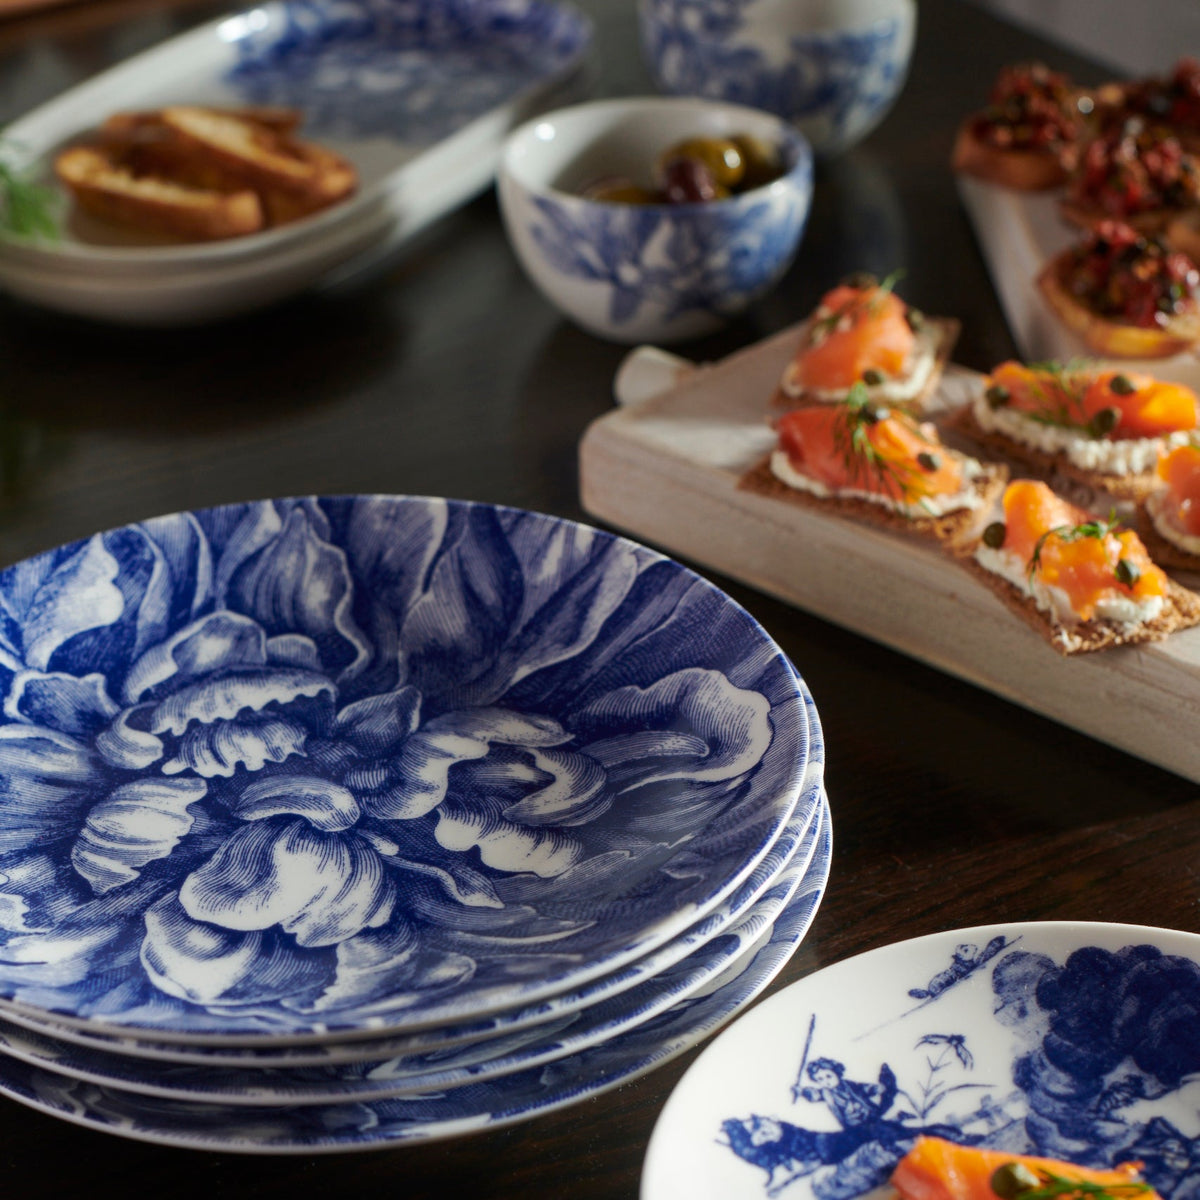 A table set with blue and white Peony 4-Piece Place Setting dinnerware from Caskata Artisanal Home, featuring premium porcelain plates and a variety of appetizers, including canapés and small bowls of sauce.